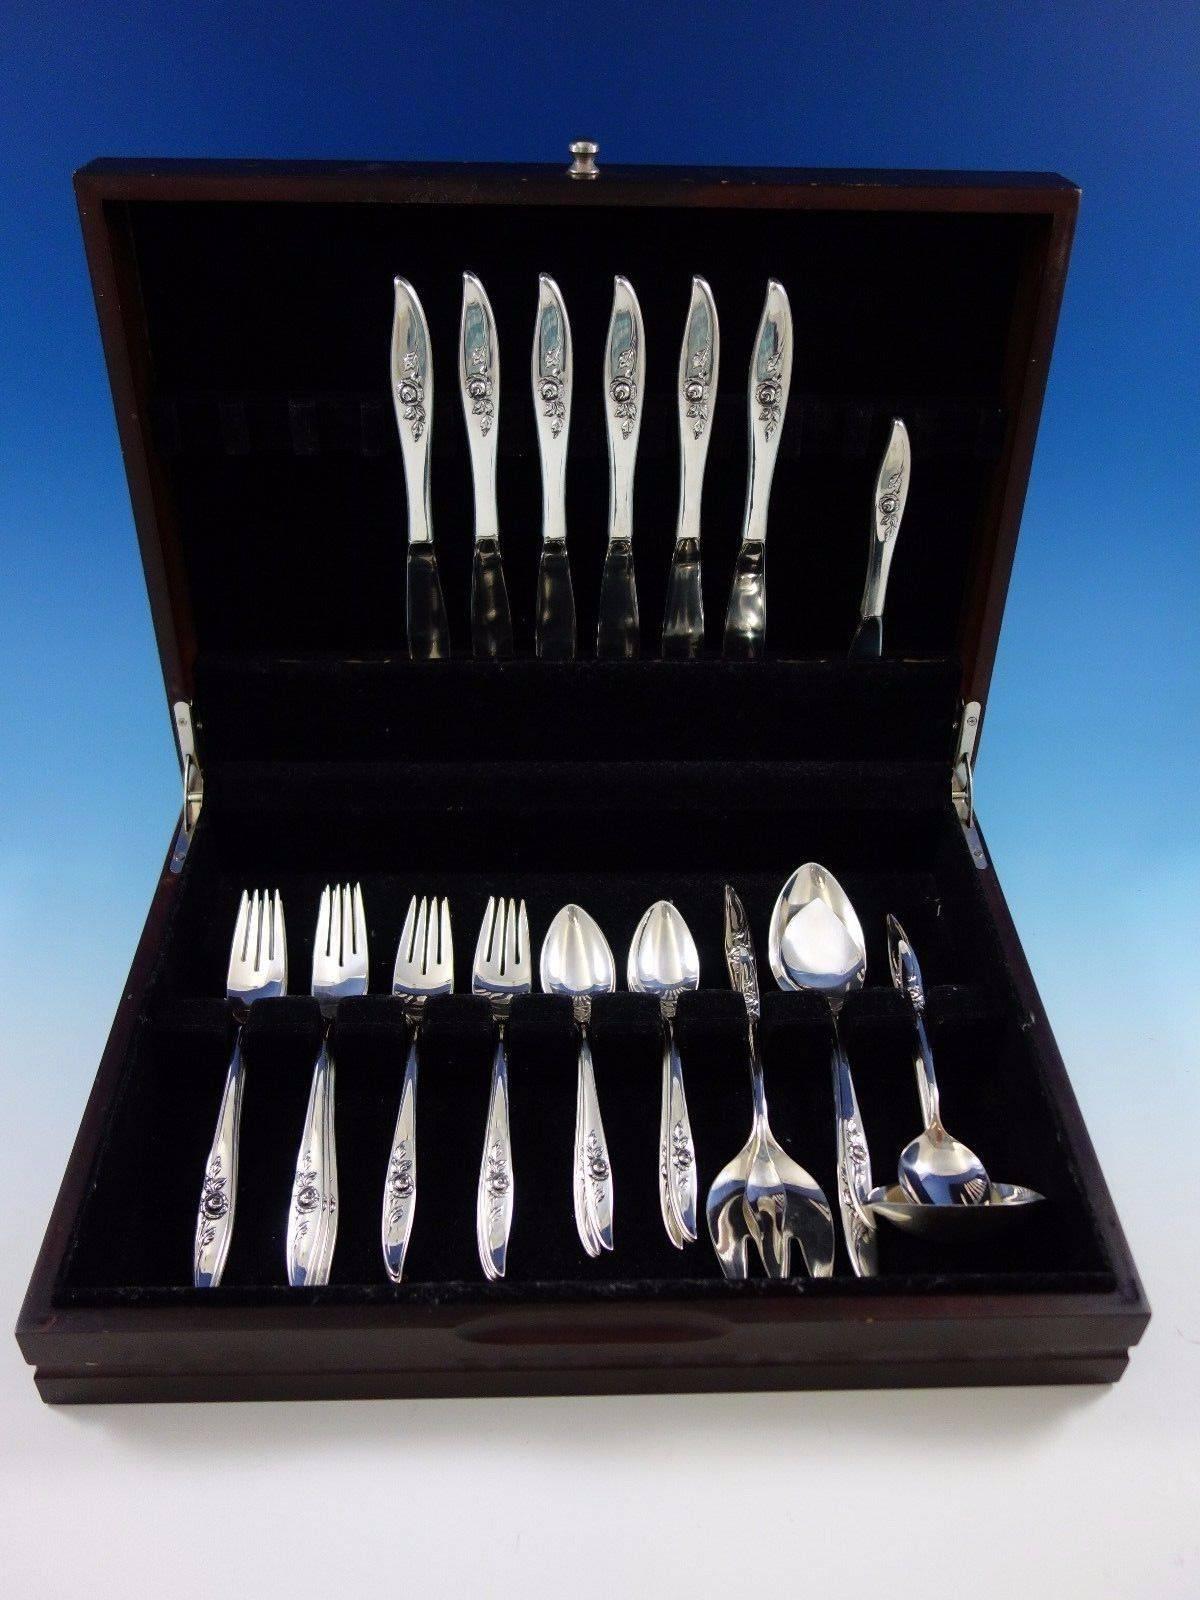 Belle Rose by Oneida, featuring beautiful flower design, sterling silver flatware set - 31 pieces. This set includes: 
six knives, 9